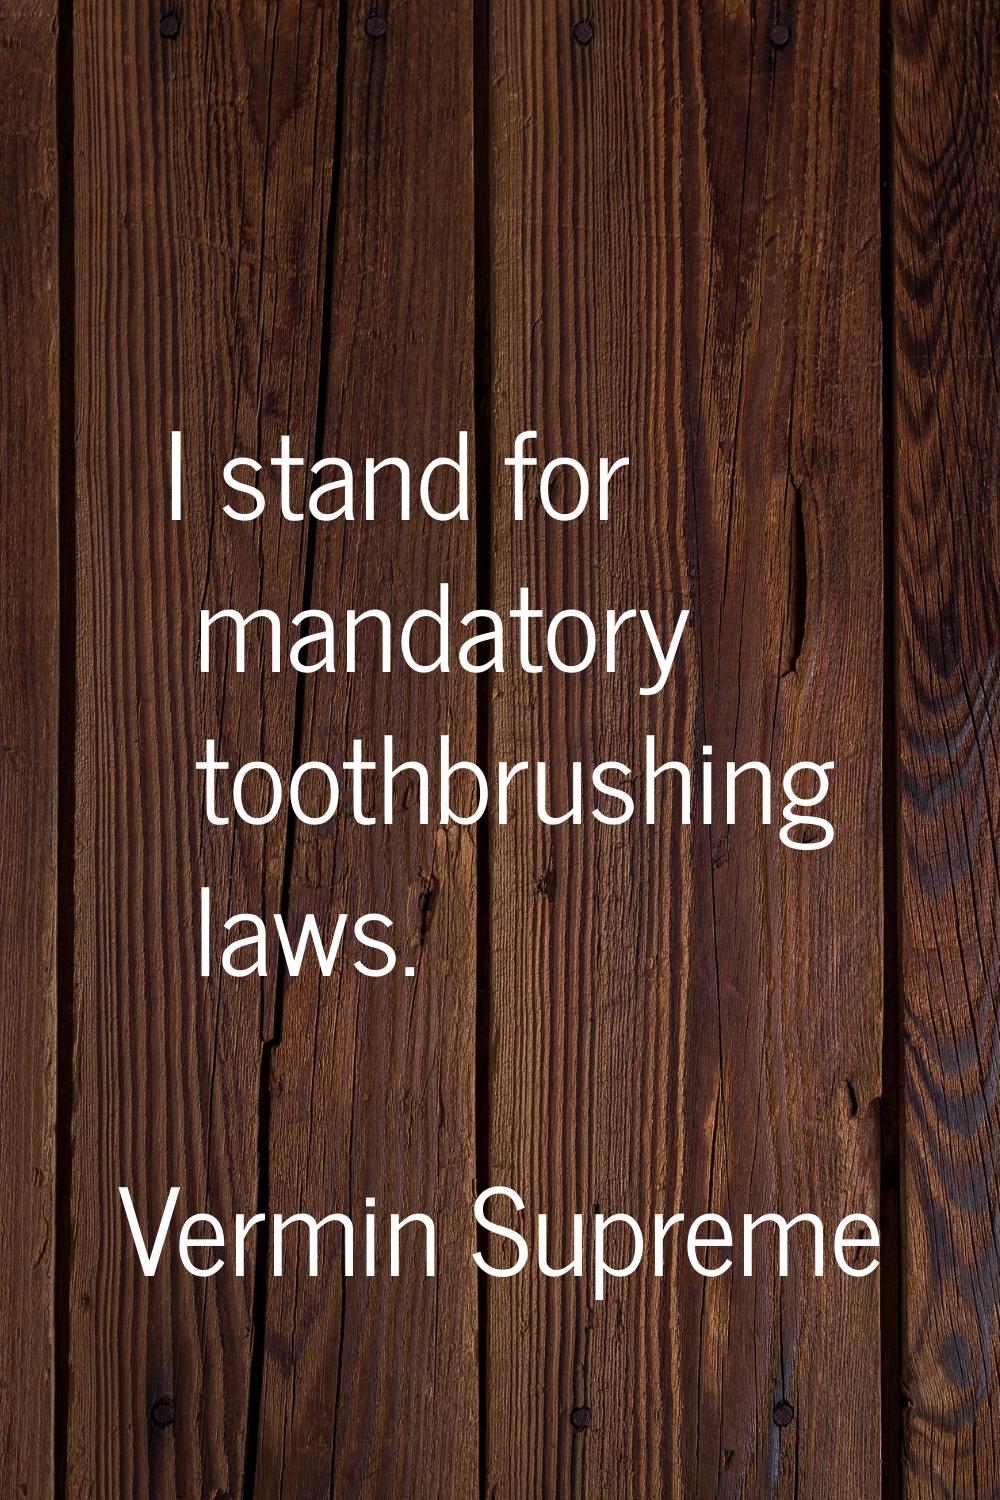 I stand for mandatory toothbrushing laws.